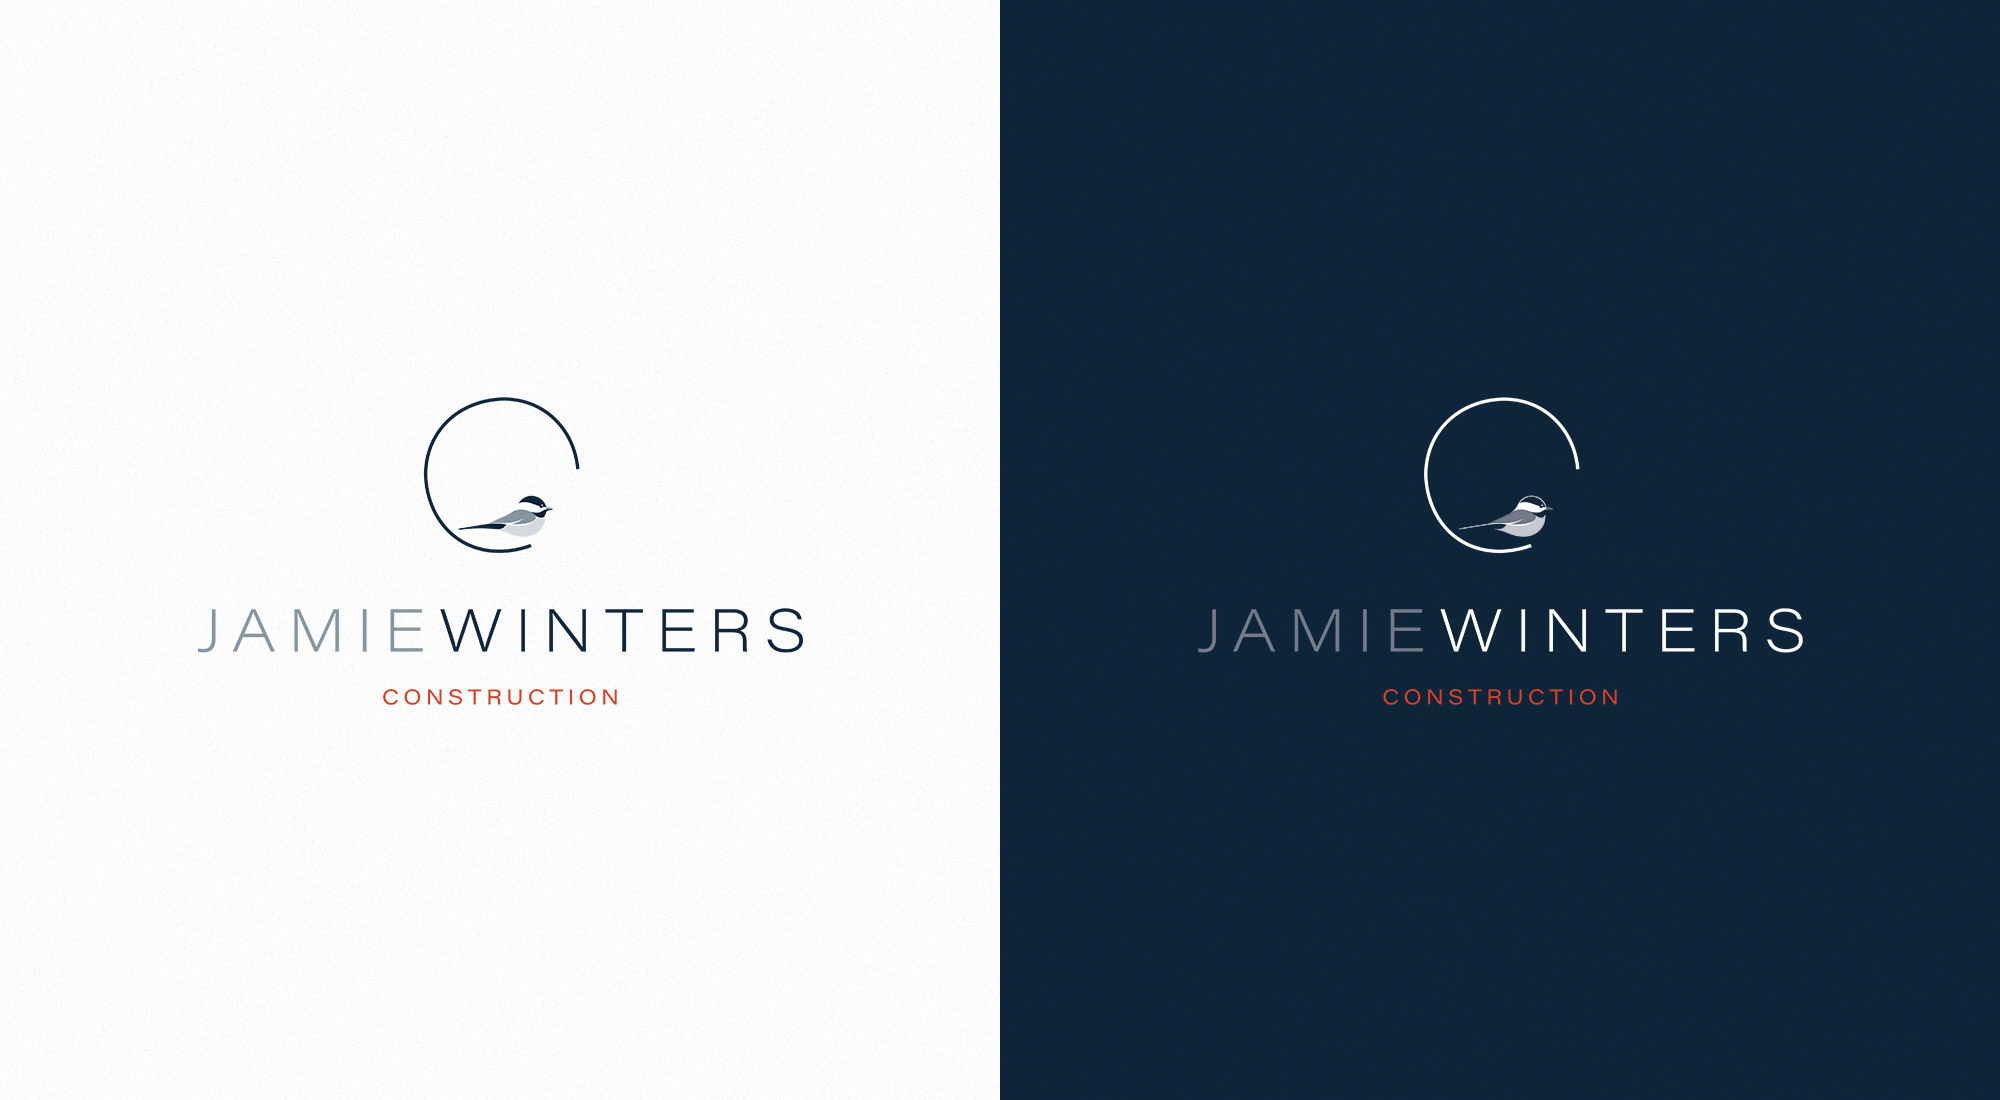 Jamie Winters Construction Stationery